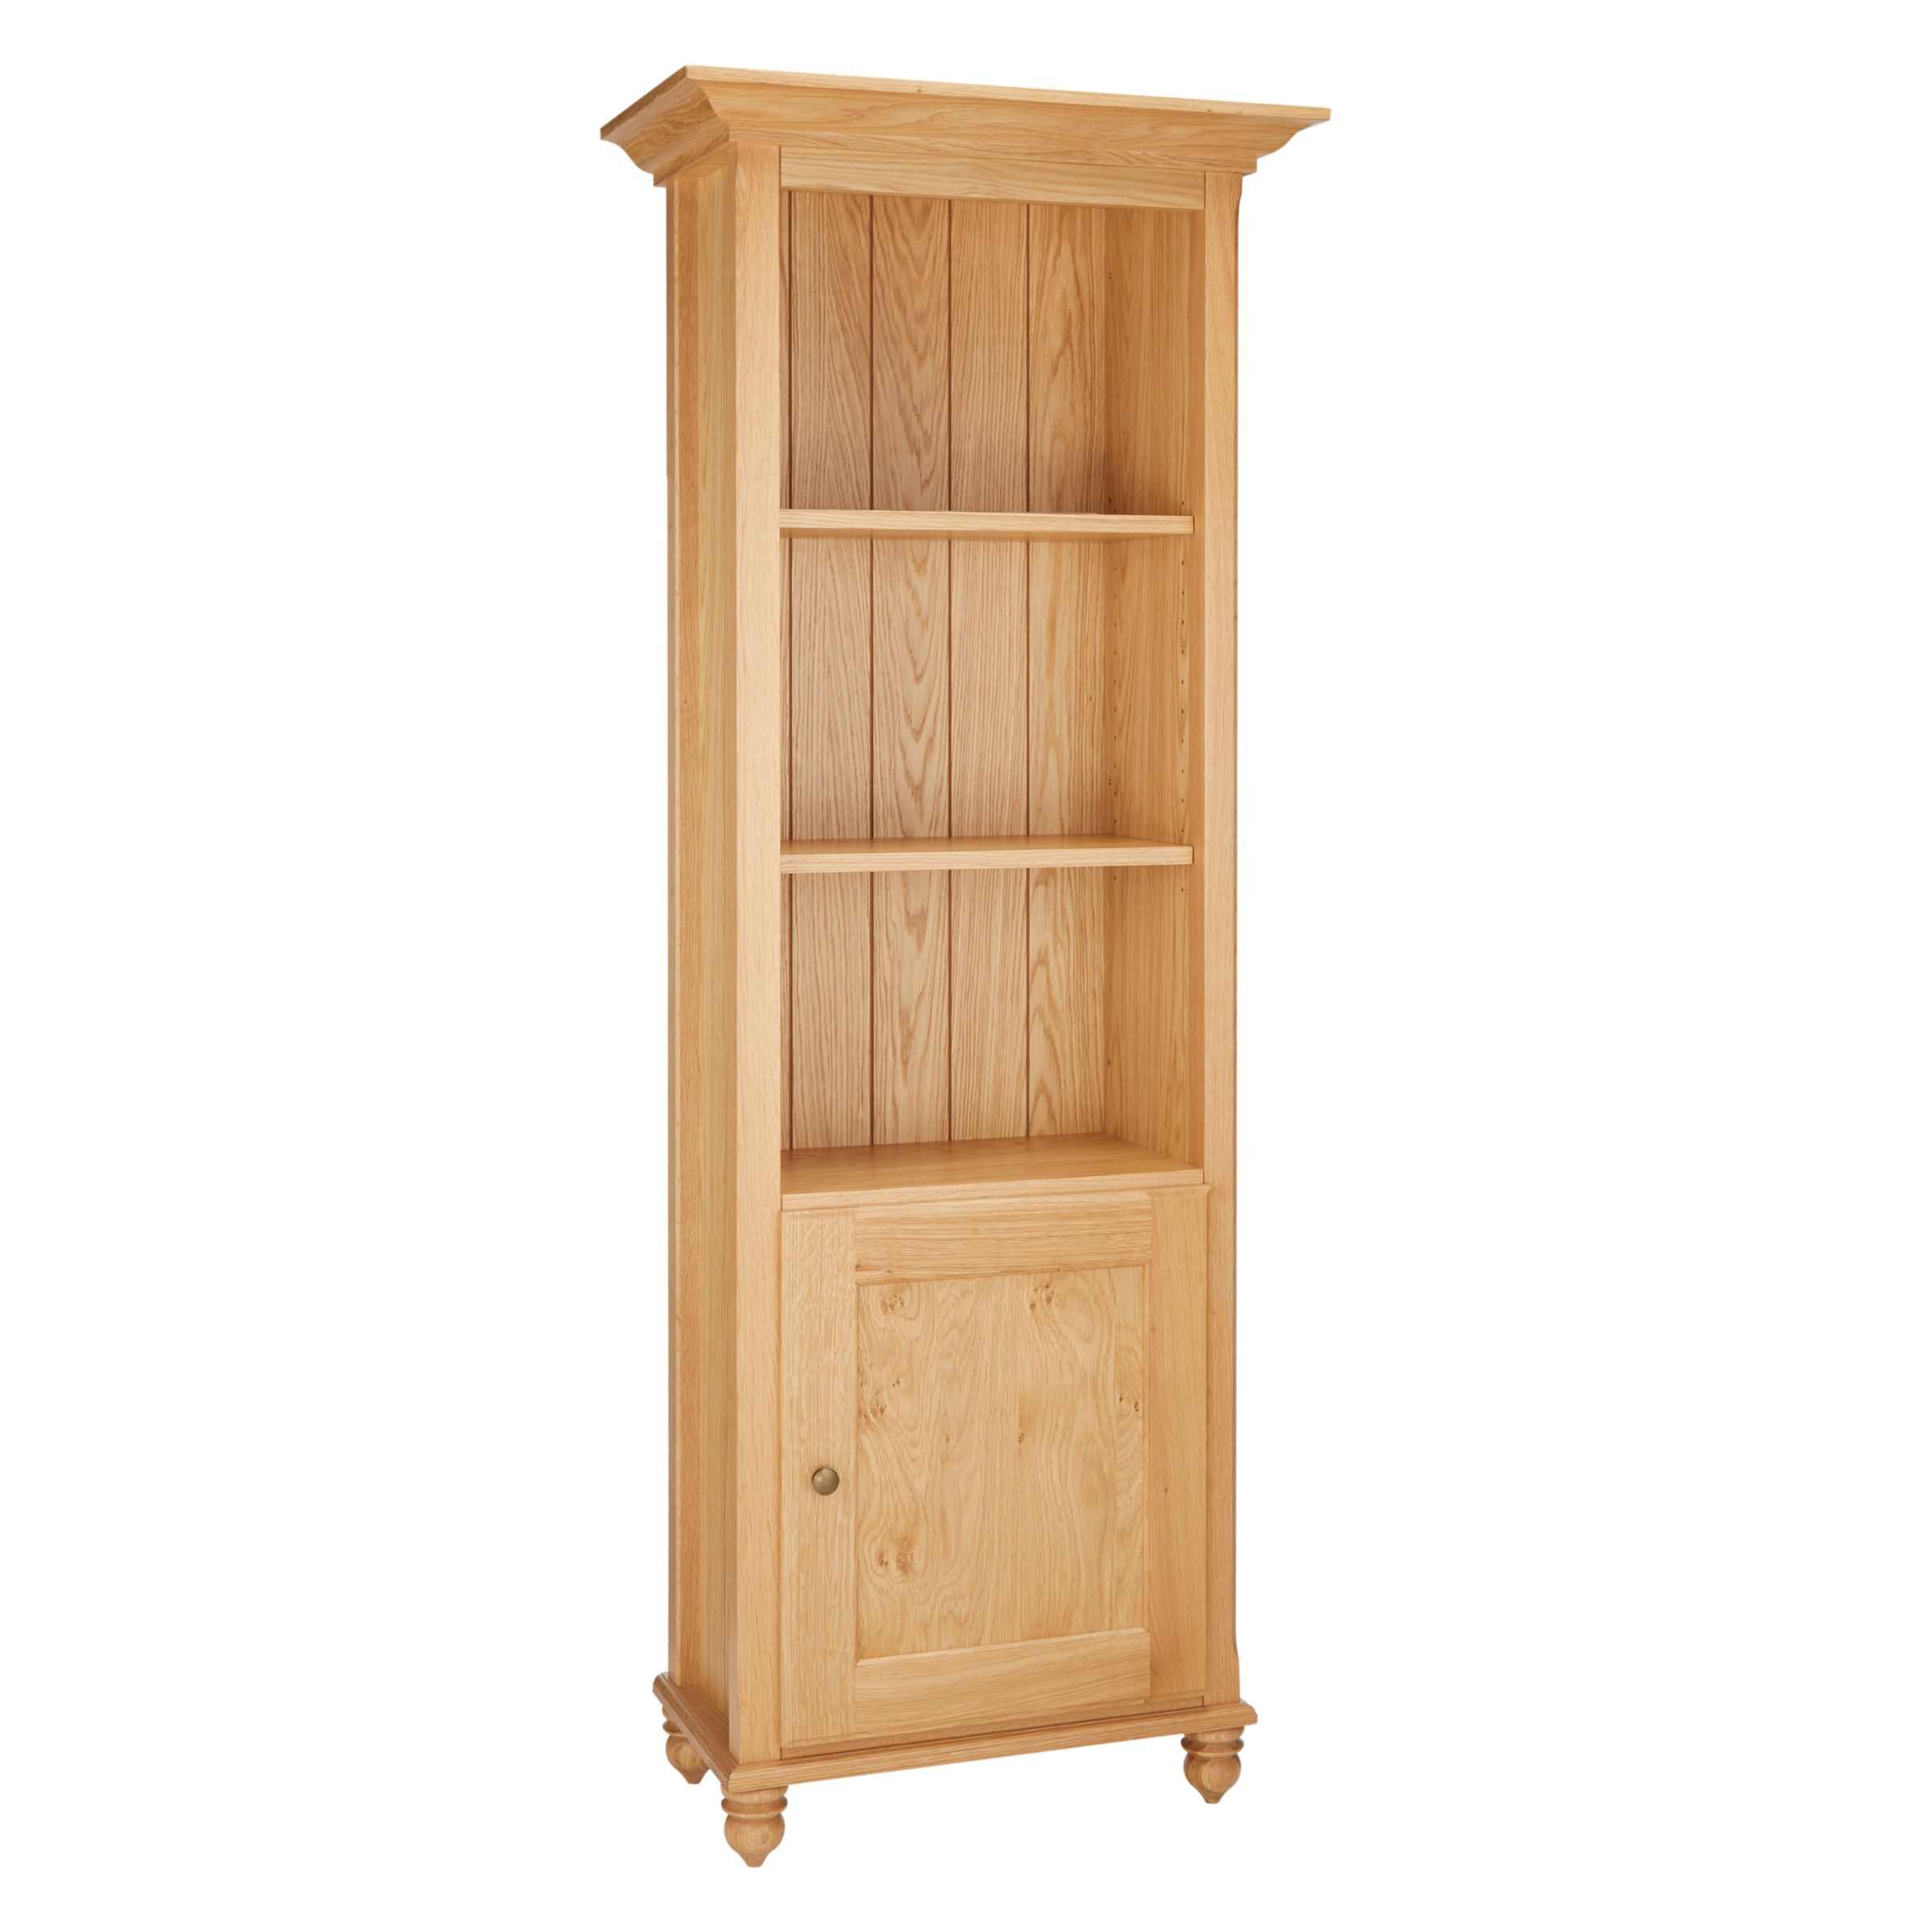 John Lewis Partners Audley Bookcase With Cupboard At John Lewis